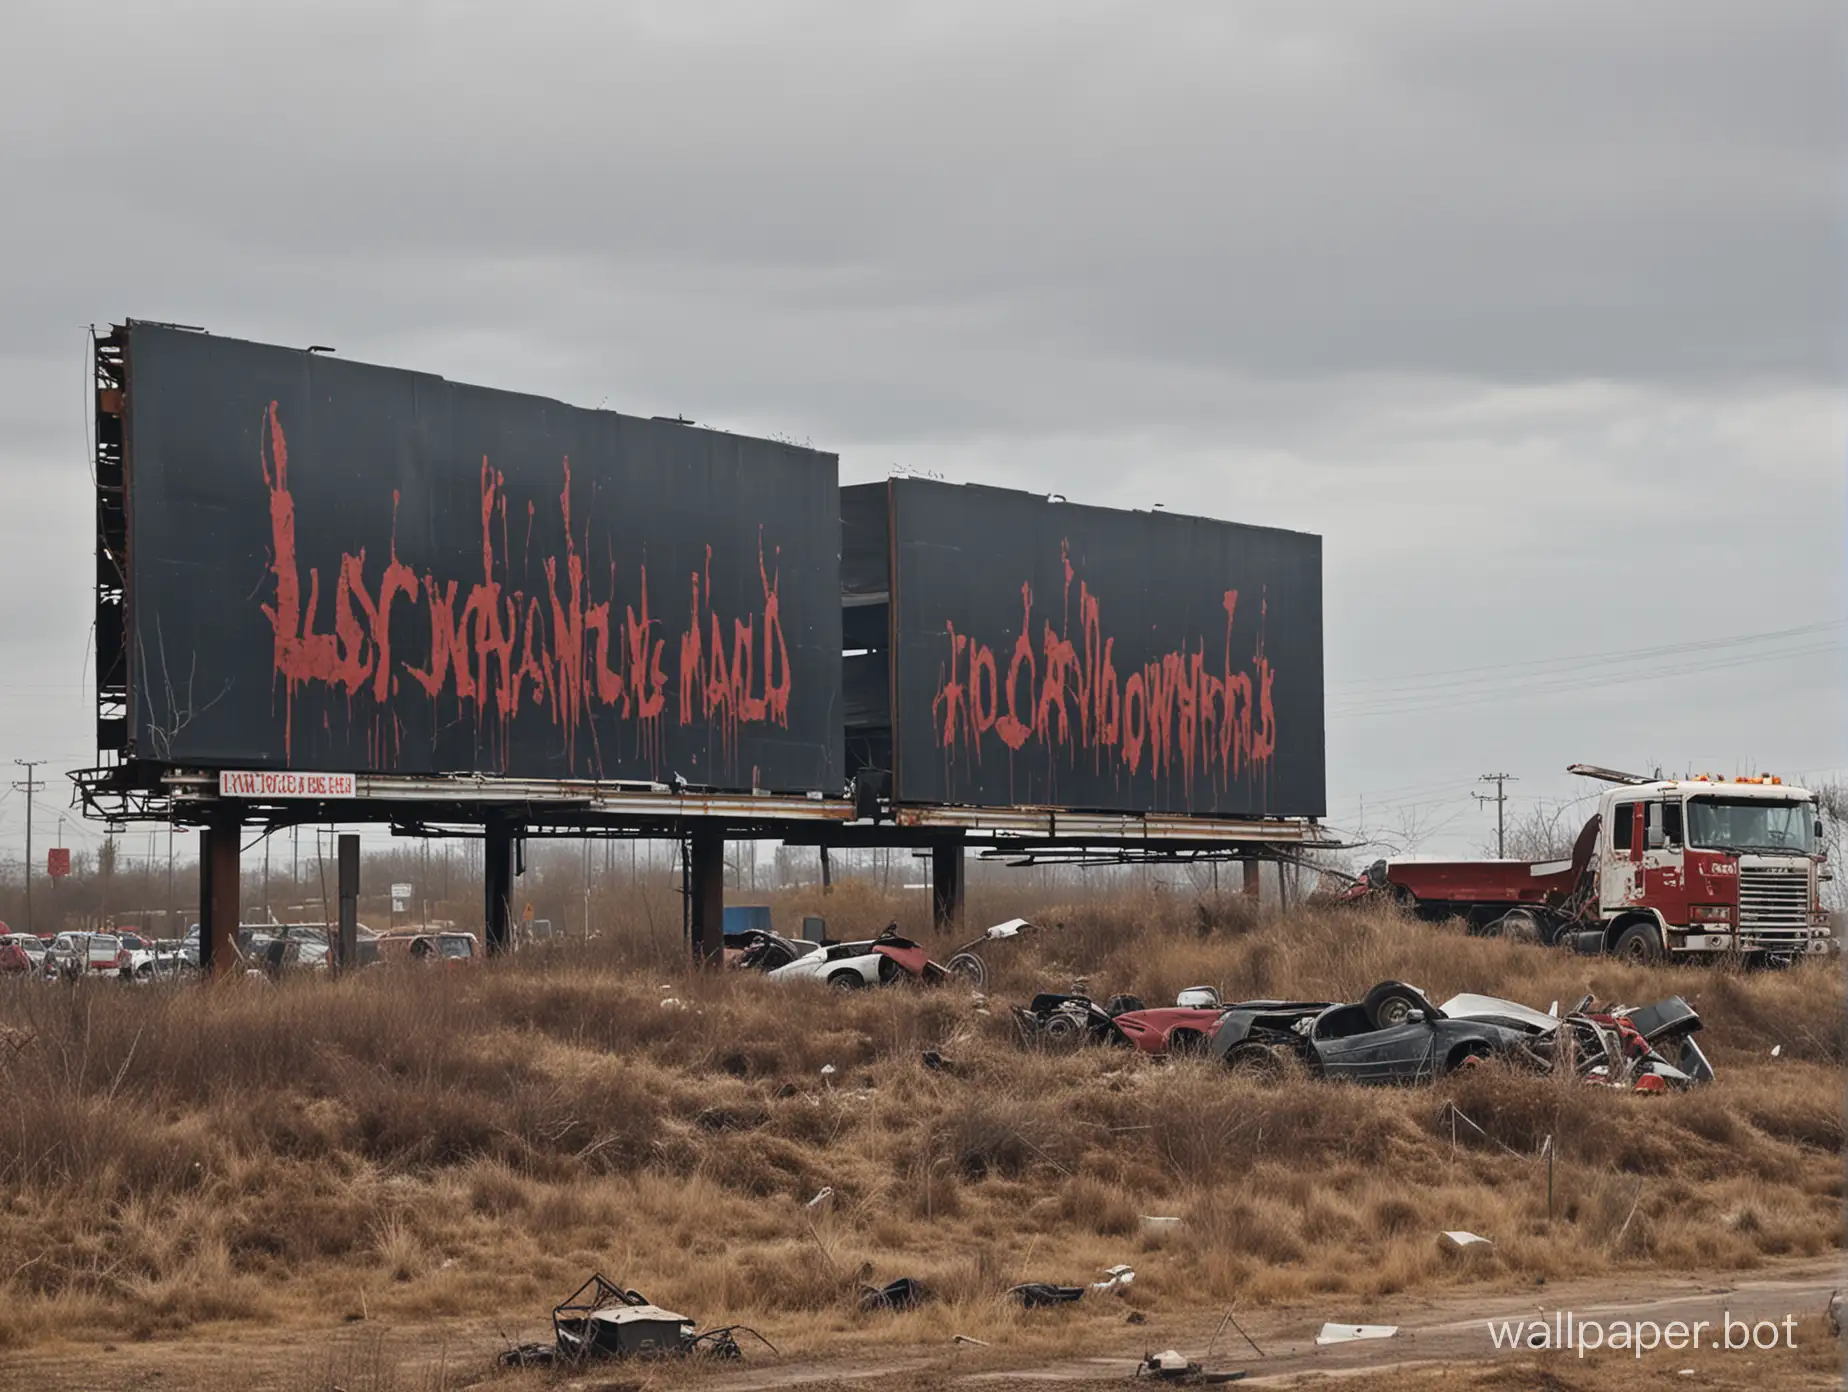 Abandoned-Scrapyard-Eerie-Horror-Scene-with-Blood-Stained-Billboards